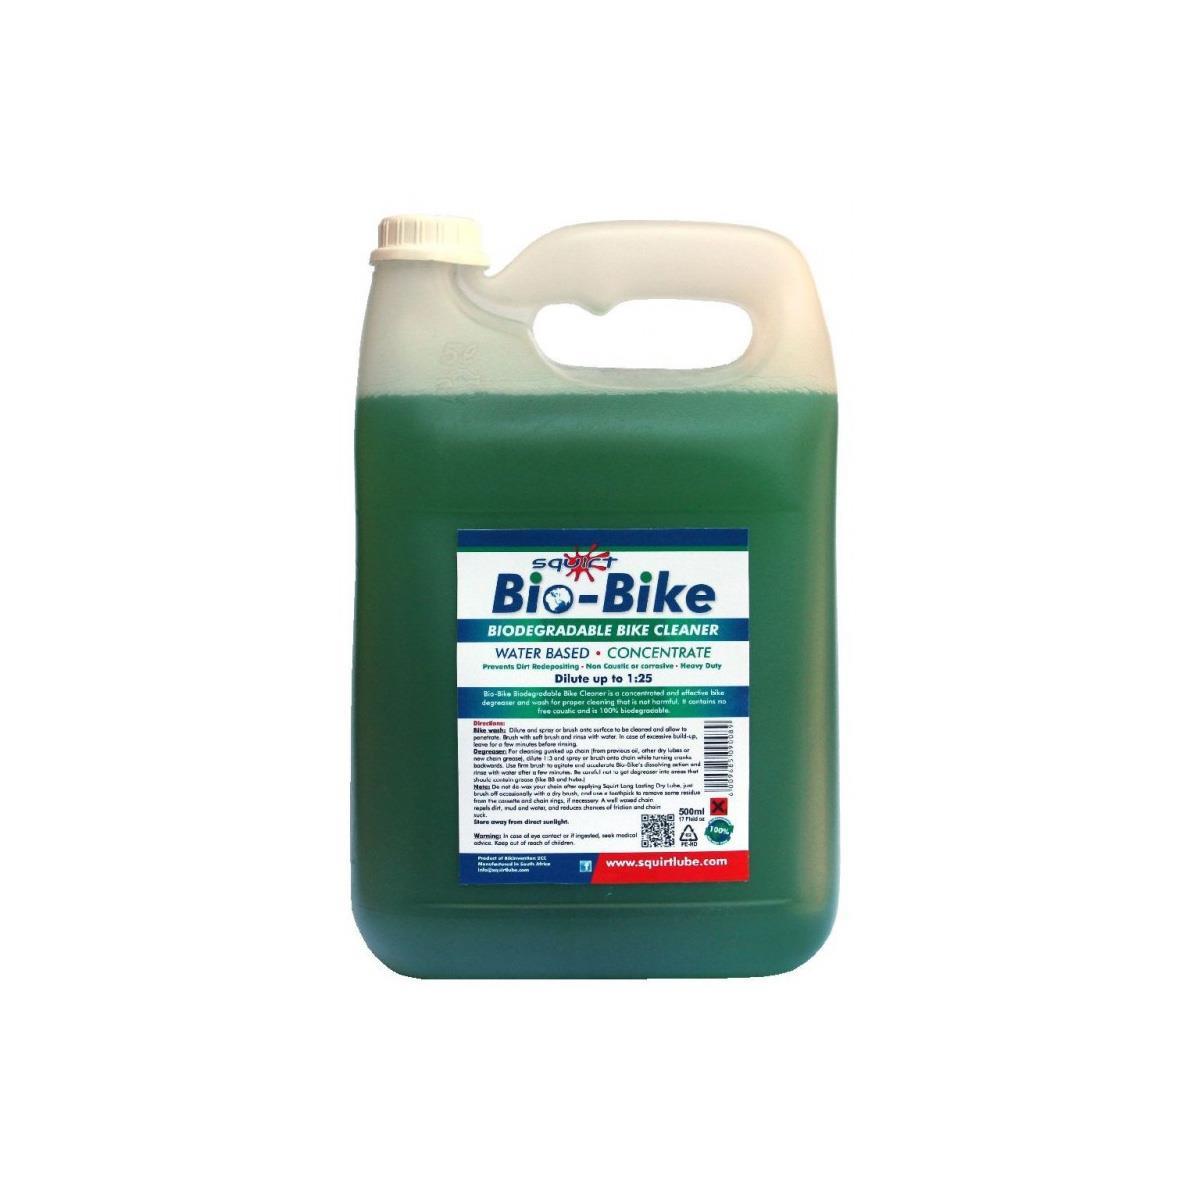 water based protective cleaner concentrated 5 litres biodegradable